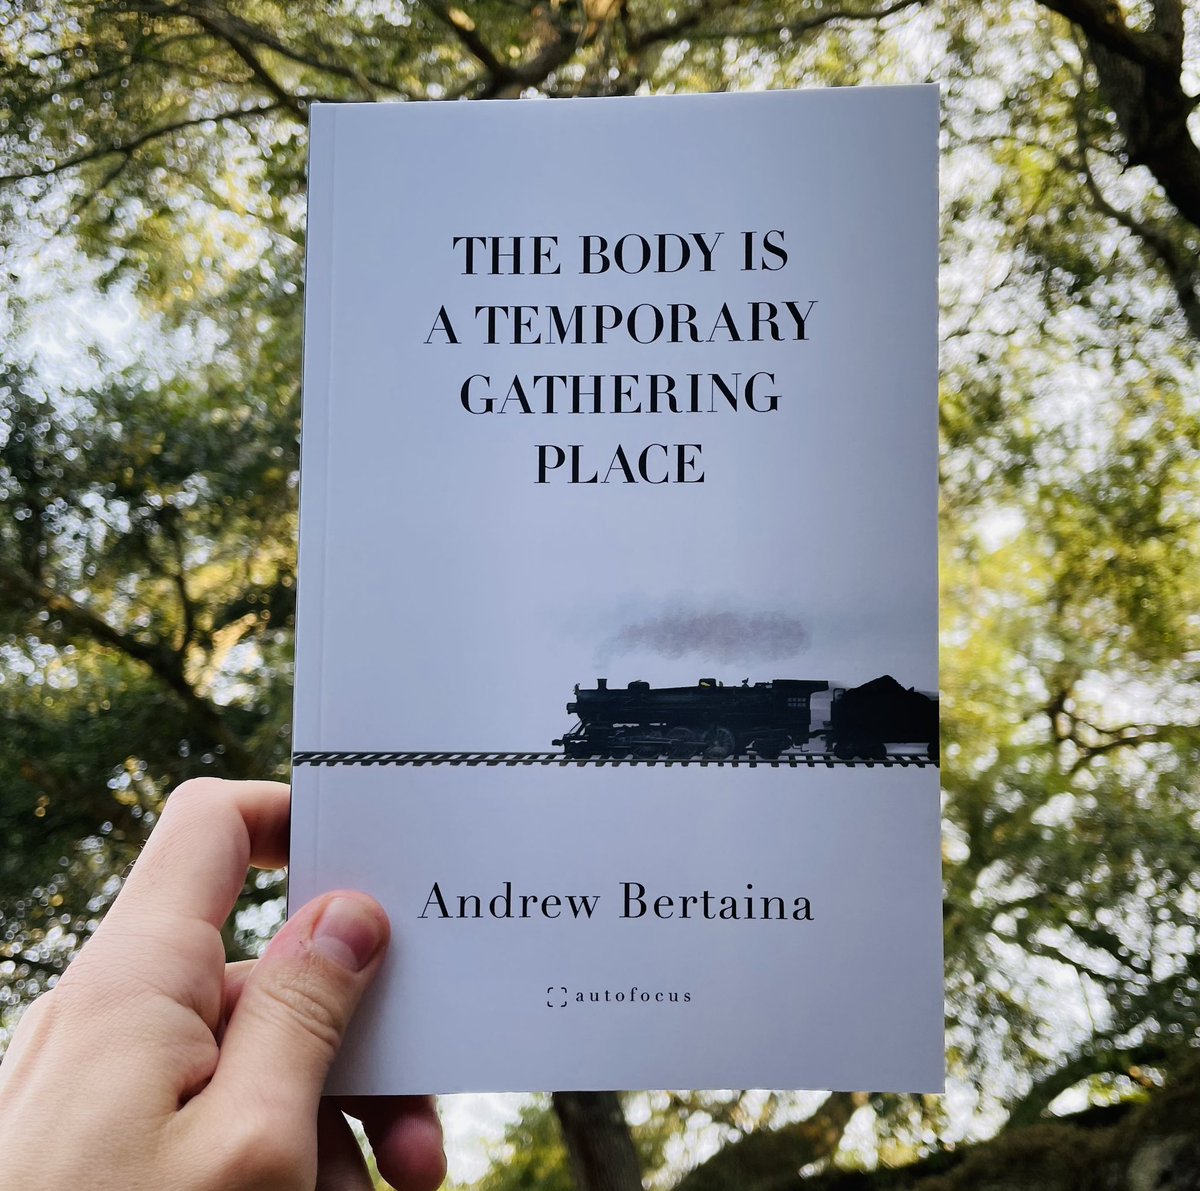 Happy launch day to @andrewbertaina! Here is THE BODY IS A TEMPORARY GATHERING PLACE under a tree. Very Bertaina, I must say! Get a copy here: autofocuslit.com/store/p/the-bo…